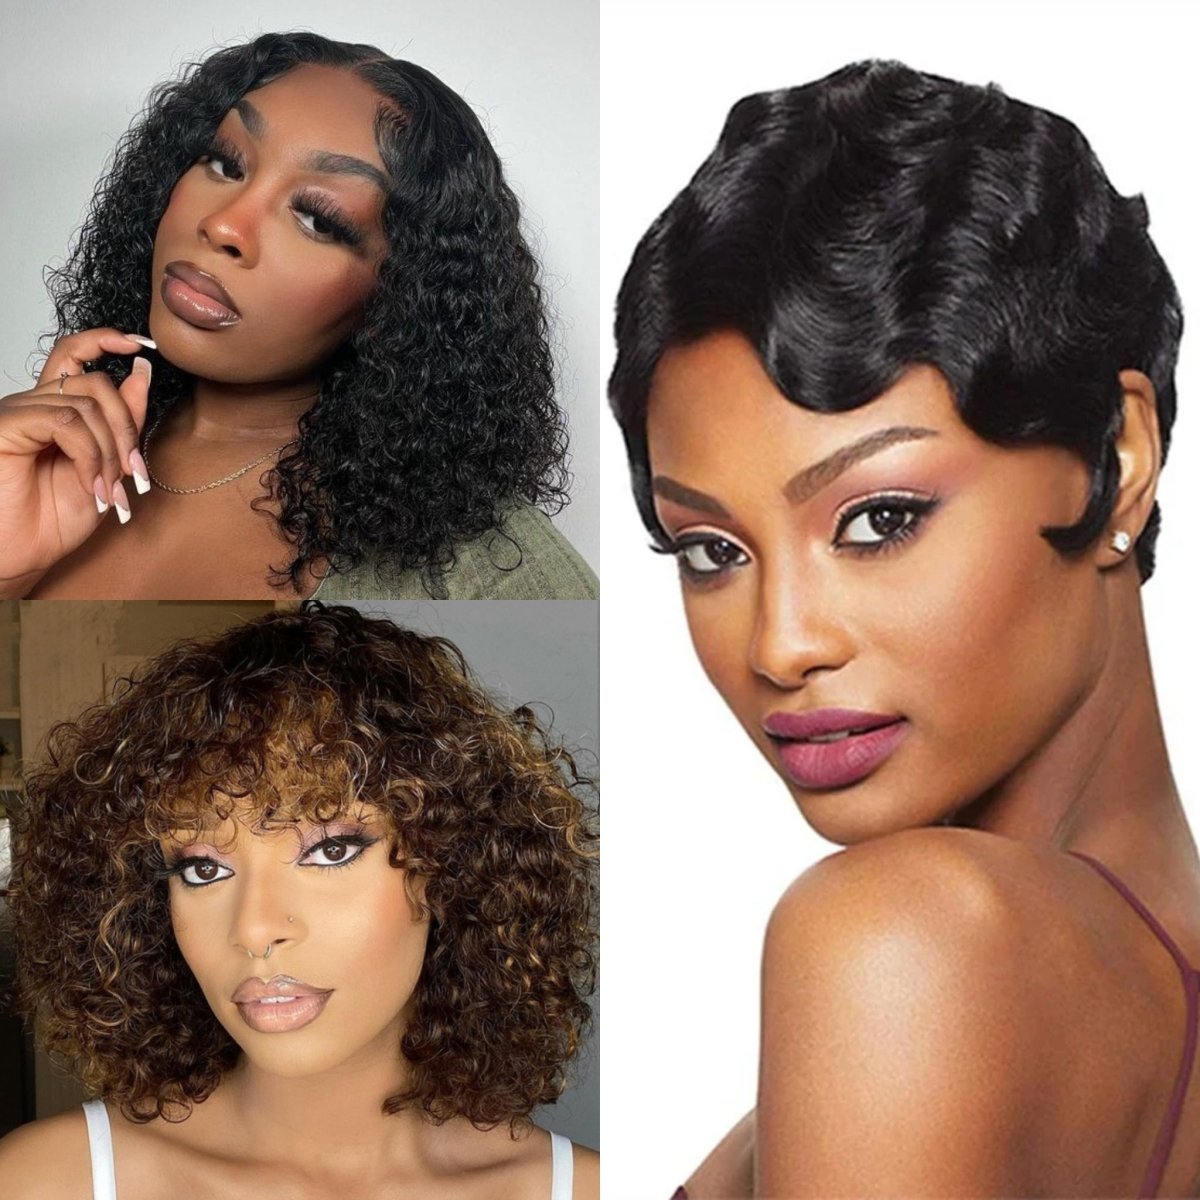 Buy 2 Get 1 Free︱Combo No.1 Water Bob Wig And Fringe Water Wave Bob Wig with Bangs Mix Color - Superlovehair